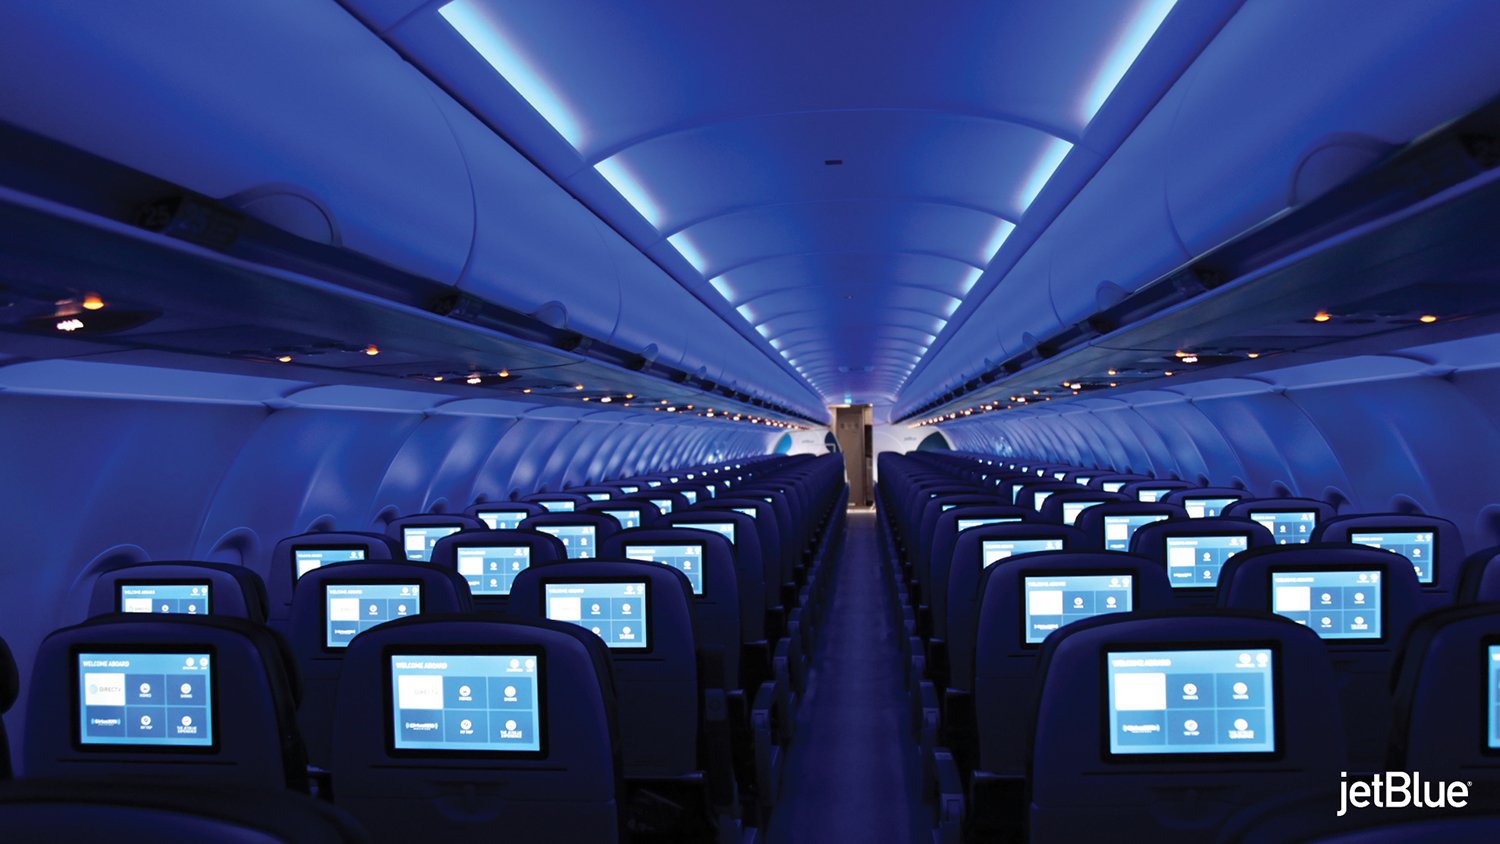 Jet Blue expands at DCOTA JetBlue announced the Design Center of the Americas will be the new home and “inspiration center” for its JetBlue Travel Products subsidiary, which offers vacation bundles. The center’s 70 employees will seek technology to make travel easier.